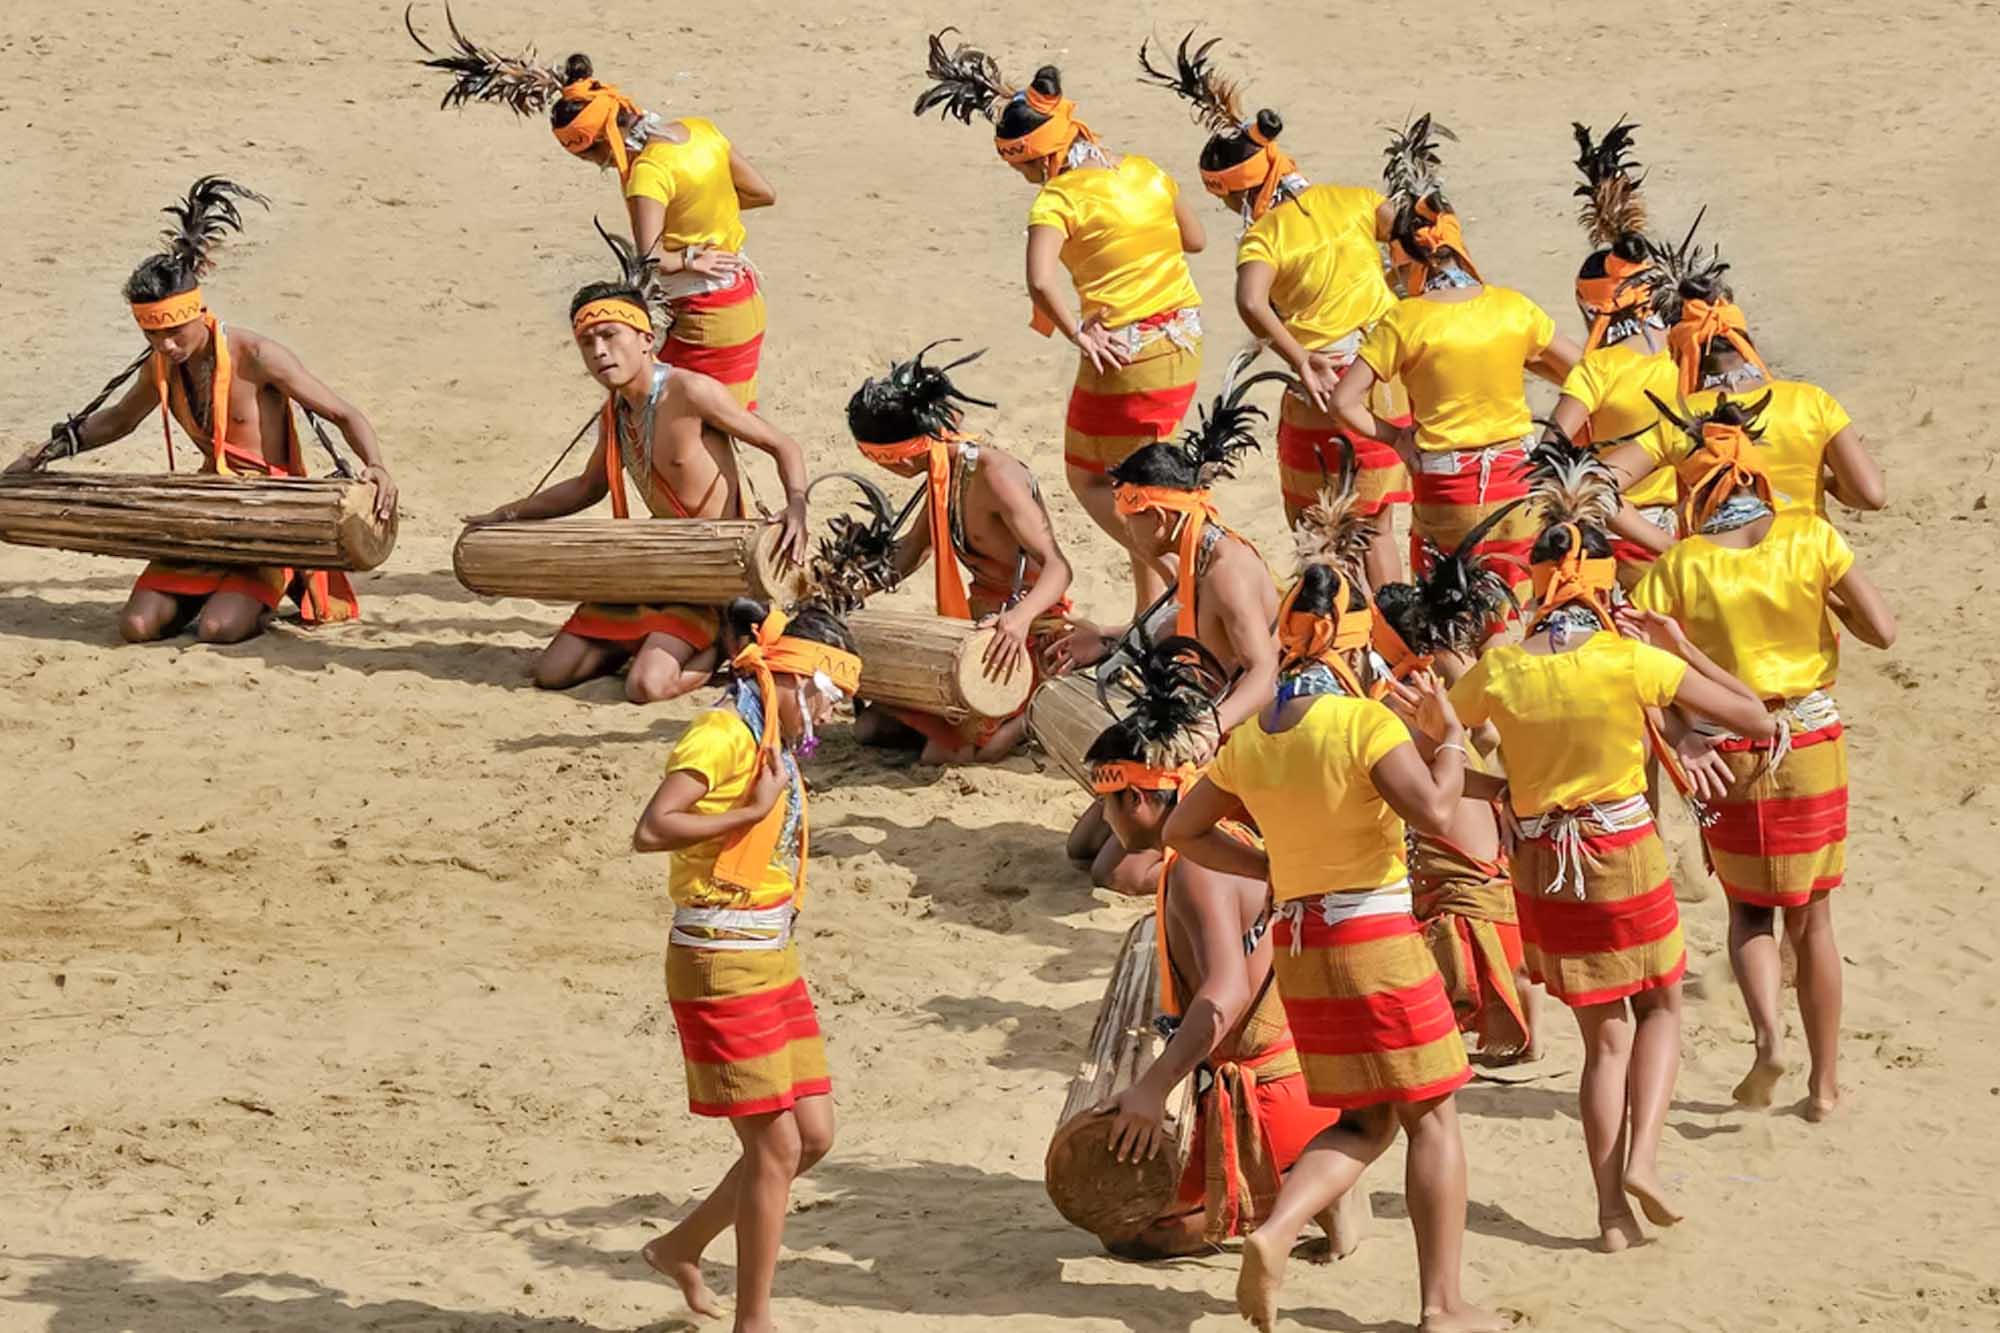 Bushu Things to Avoid in Nagaland,Photography Etiquette at Nagaland,Respecting Local Customs and Traditions,Wildlife and Nature Conservation,Cultural Sensitivity at Nagaland,Appreciating Local Cuisine,Dress Code and Clothing Etiquette